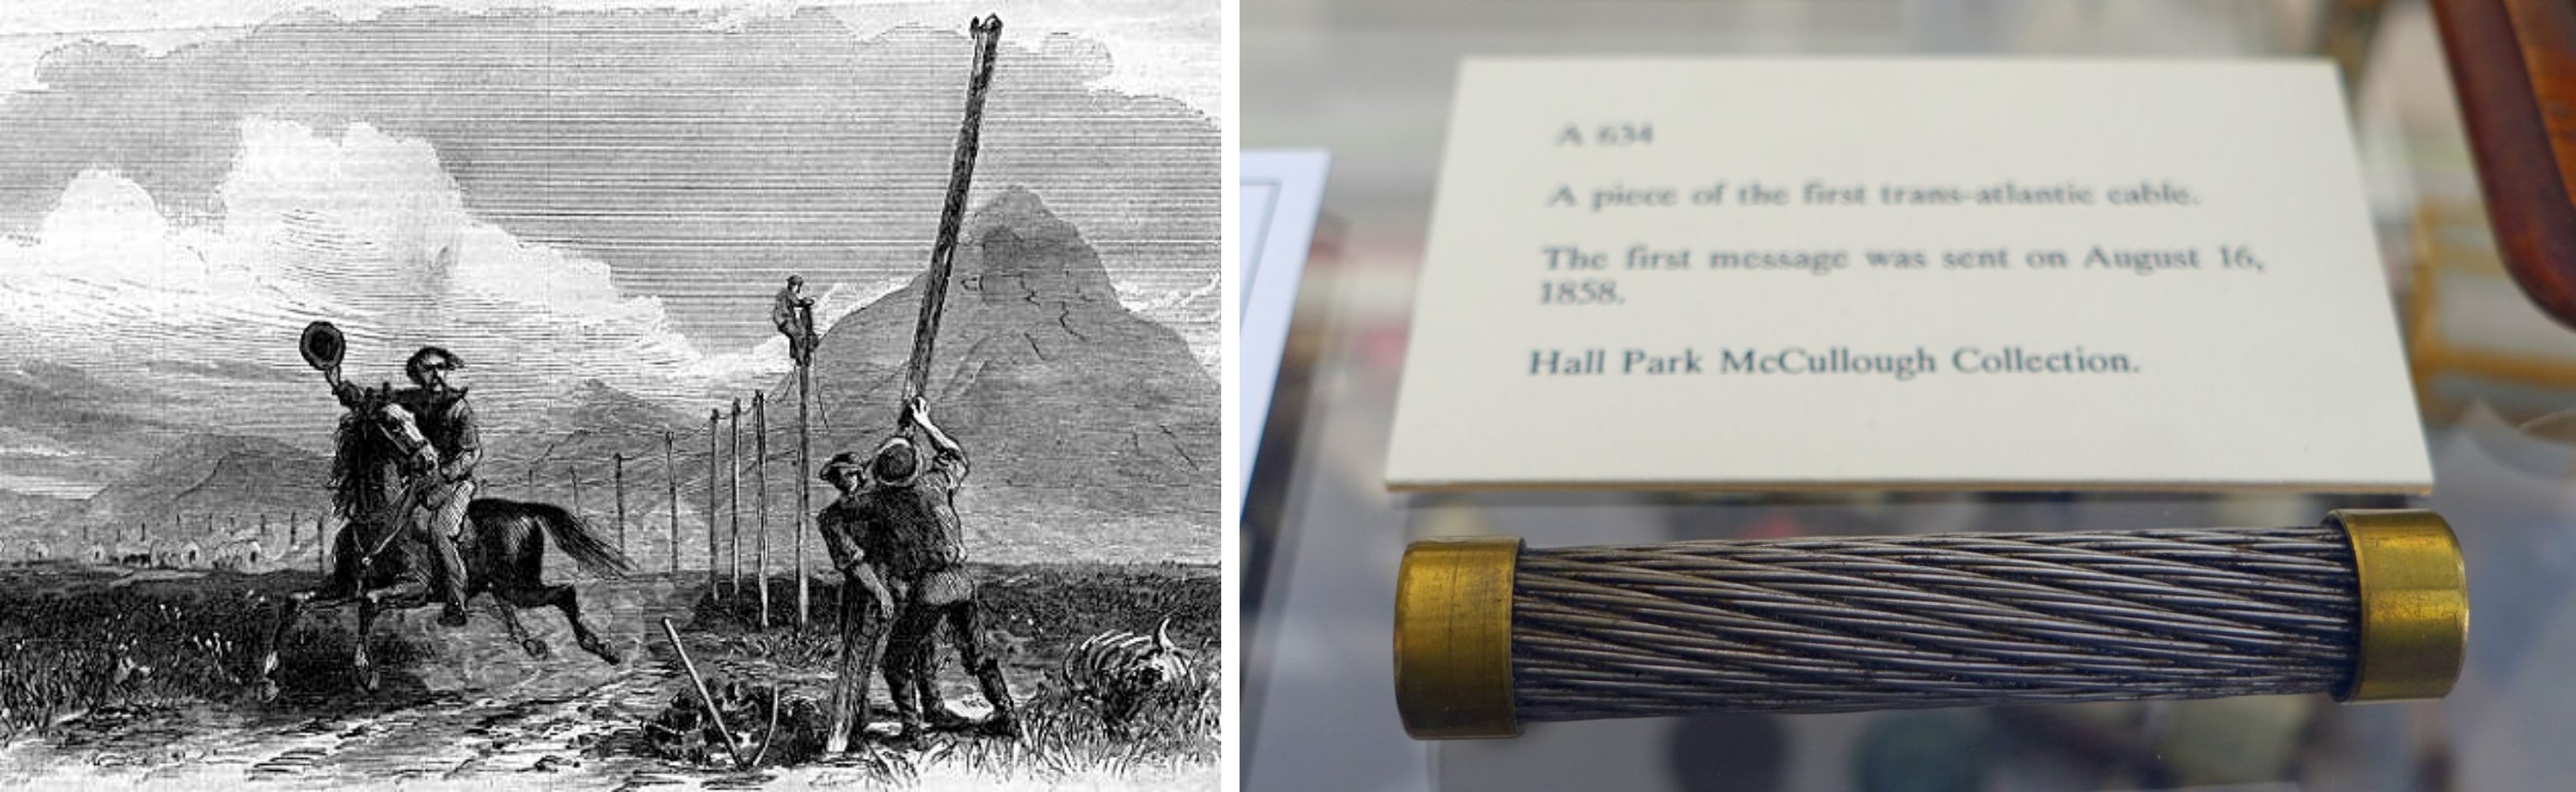 On the left, engraving depicting the first transcontinental telegraph. On the right, a segment of the first transatlantic telegraph cable.